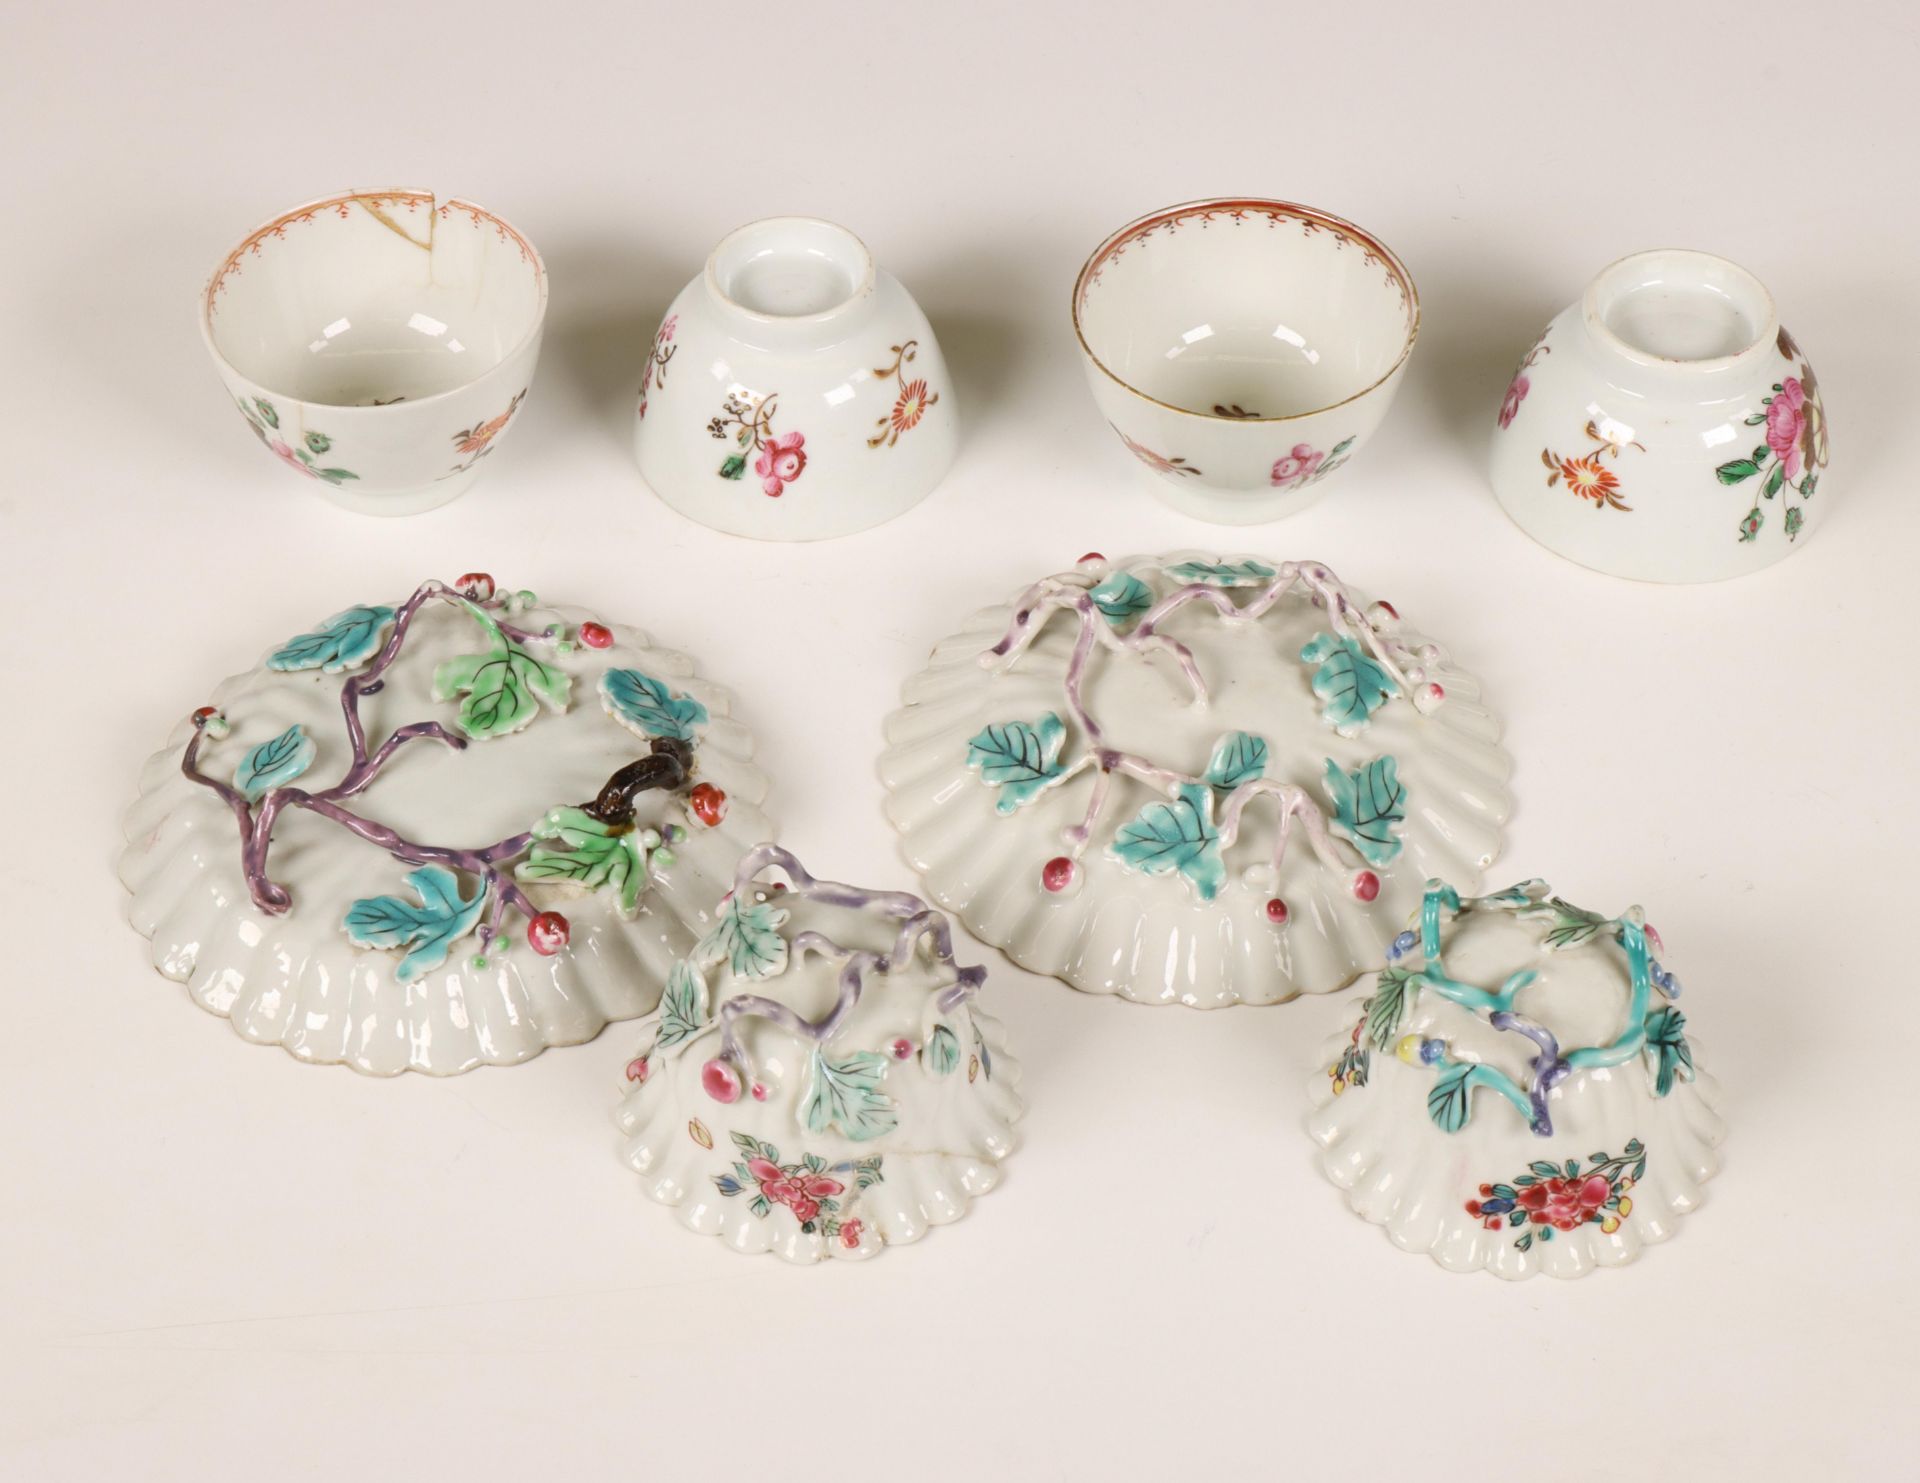 China, collection of famille rose porcelain cups and saucers, late Qing dynasty (1644-1912), - Bild 2 aus 2